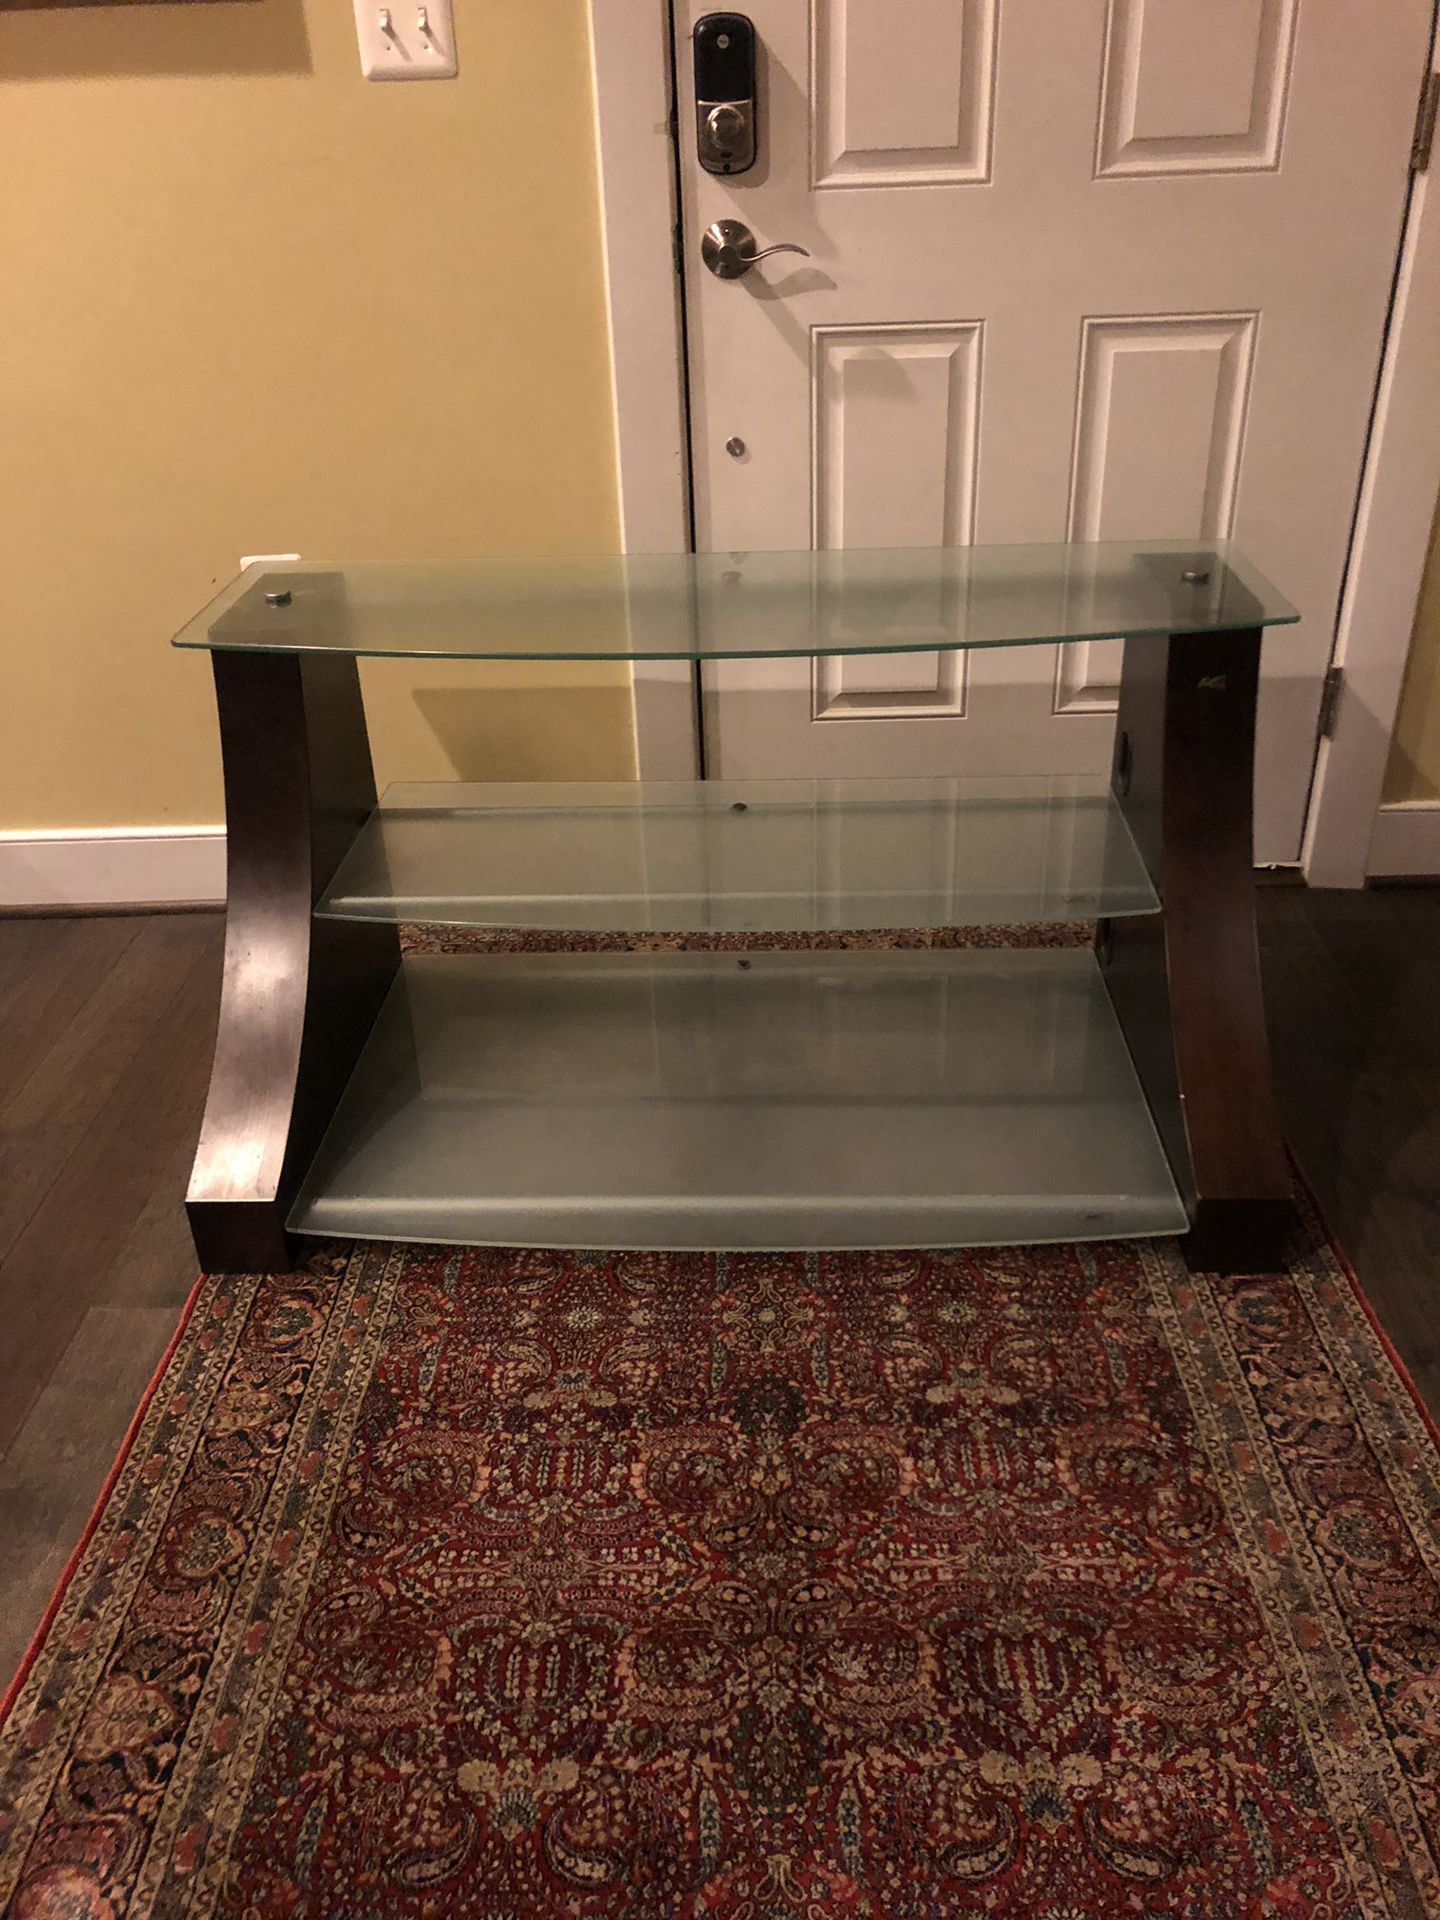 Bell’O Tv Stand